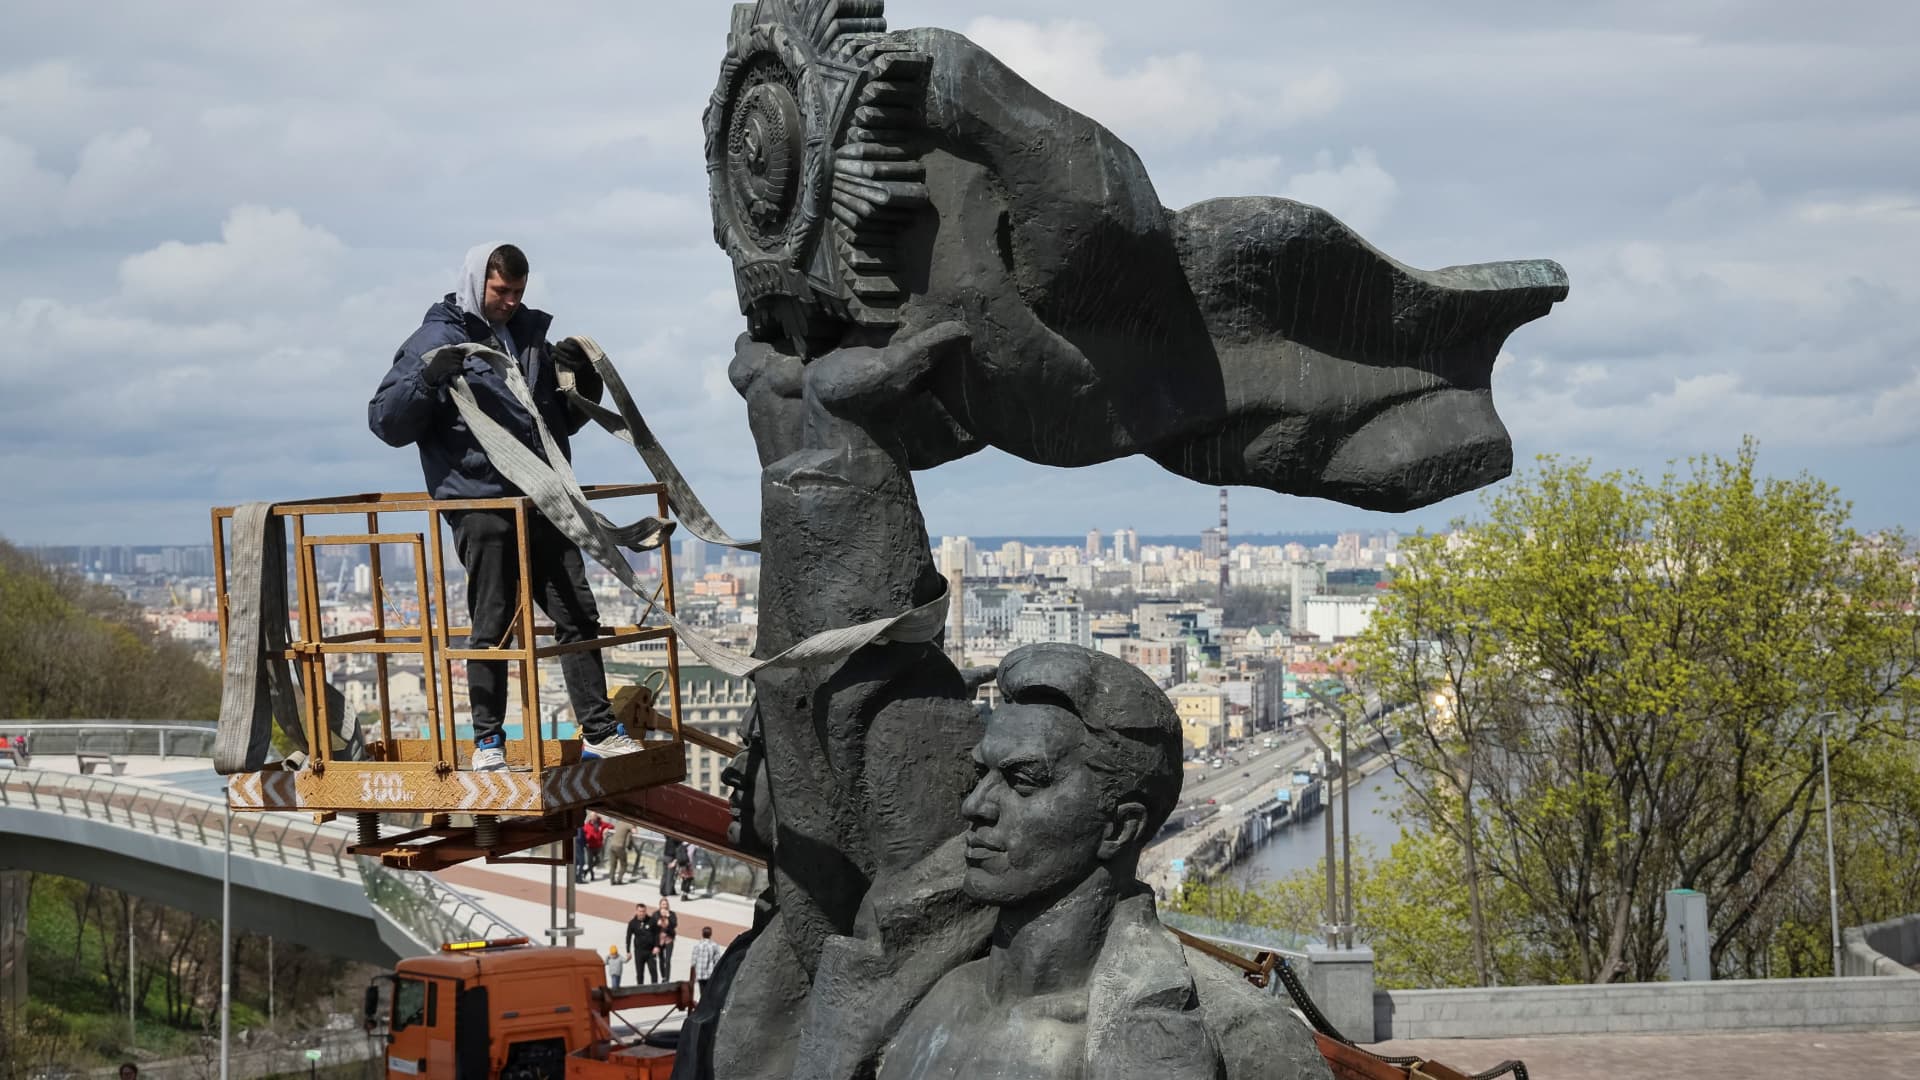 A Soviet monument to a friendship between Ukrainian and Russian nations is seen during its demolition, amid Russia's invasion of Ukraine, in central Kyiv, Ukraine April 26, 2022. 